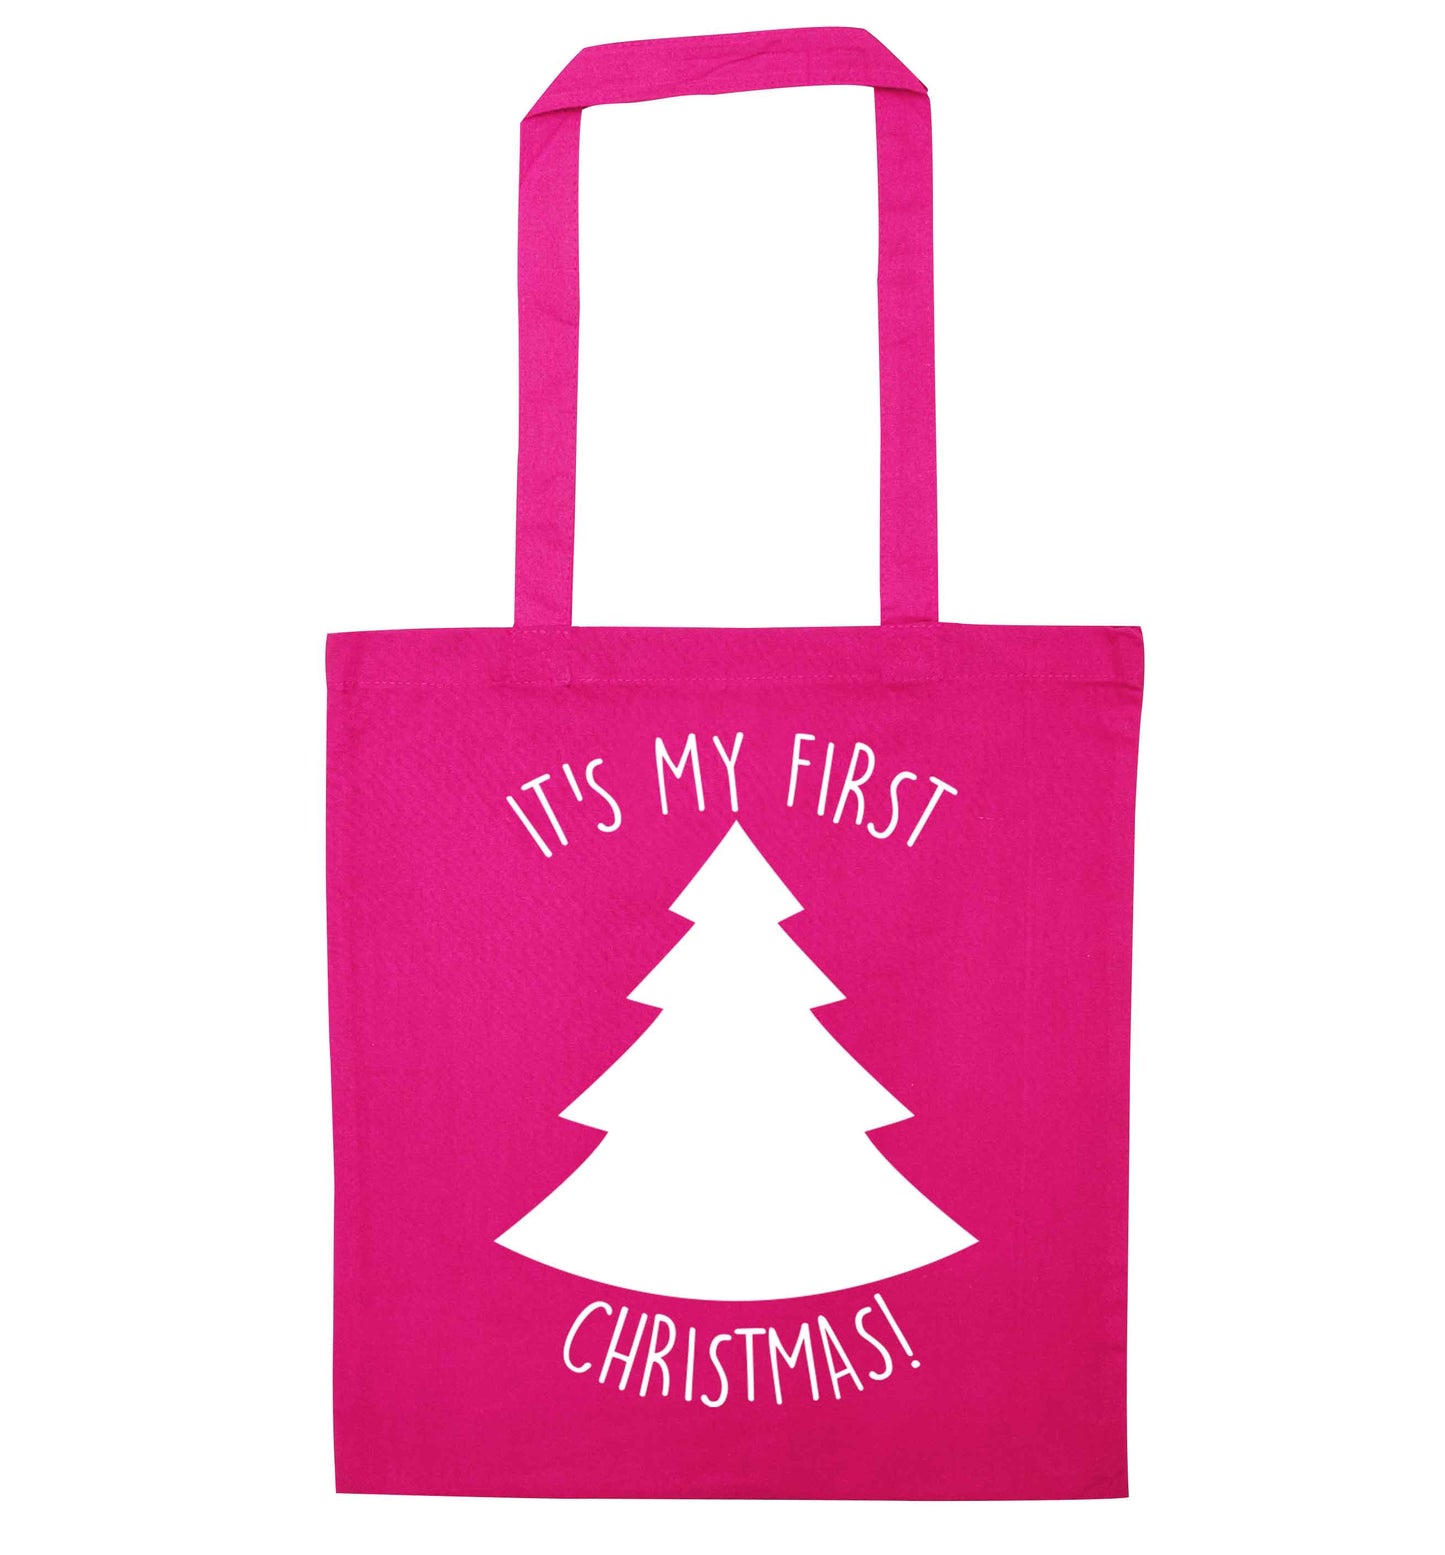 It's my first Christmas - tree pink tote bag